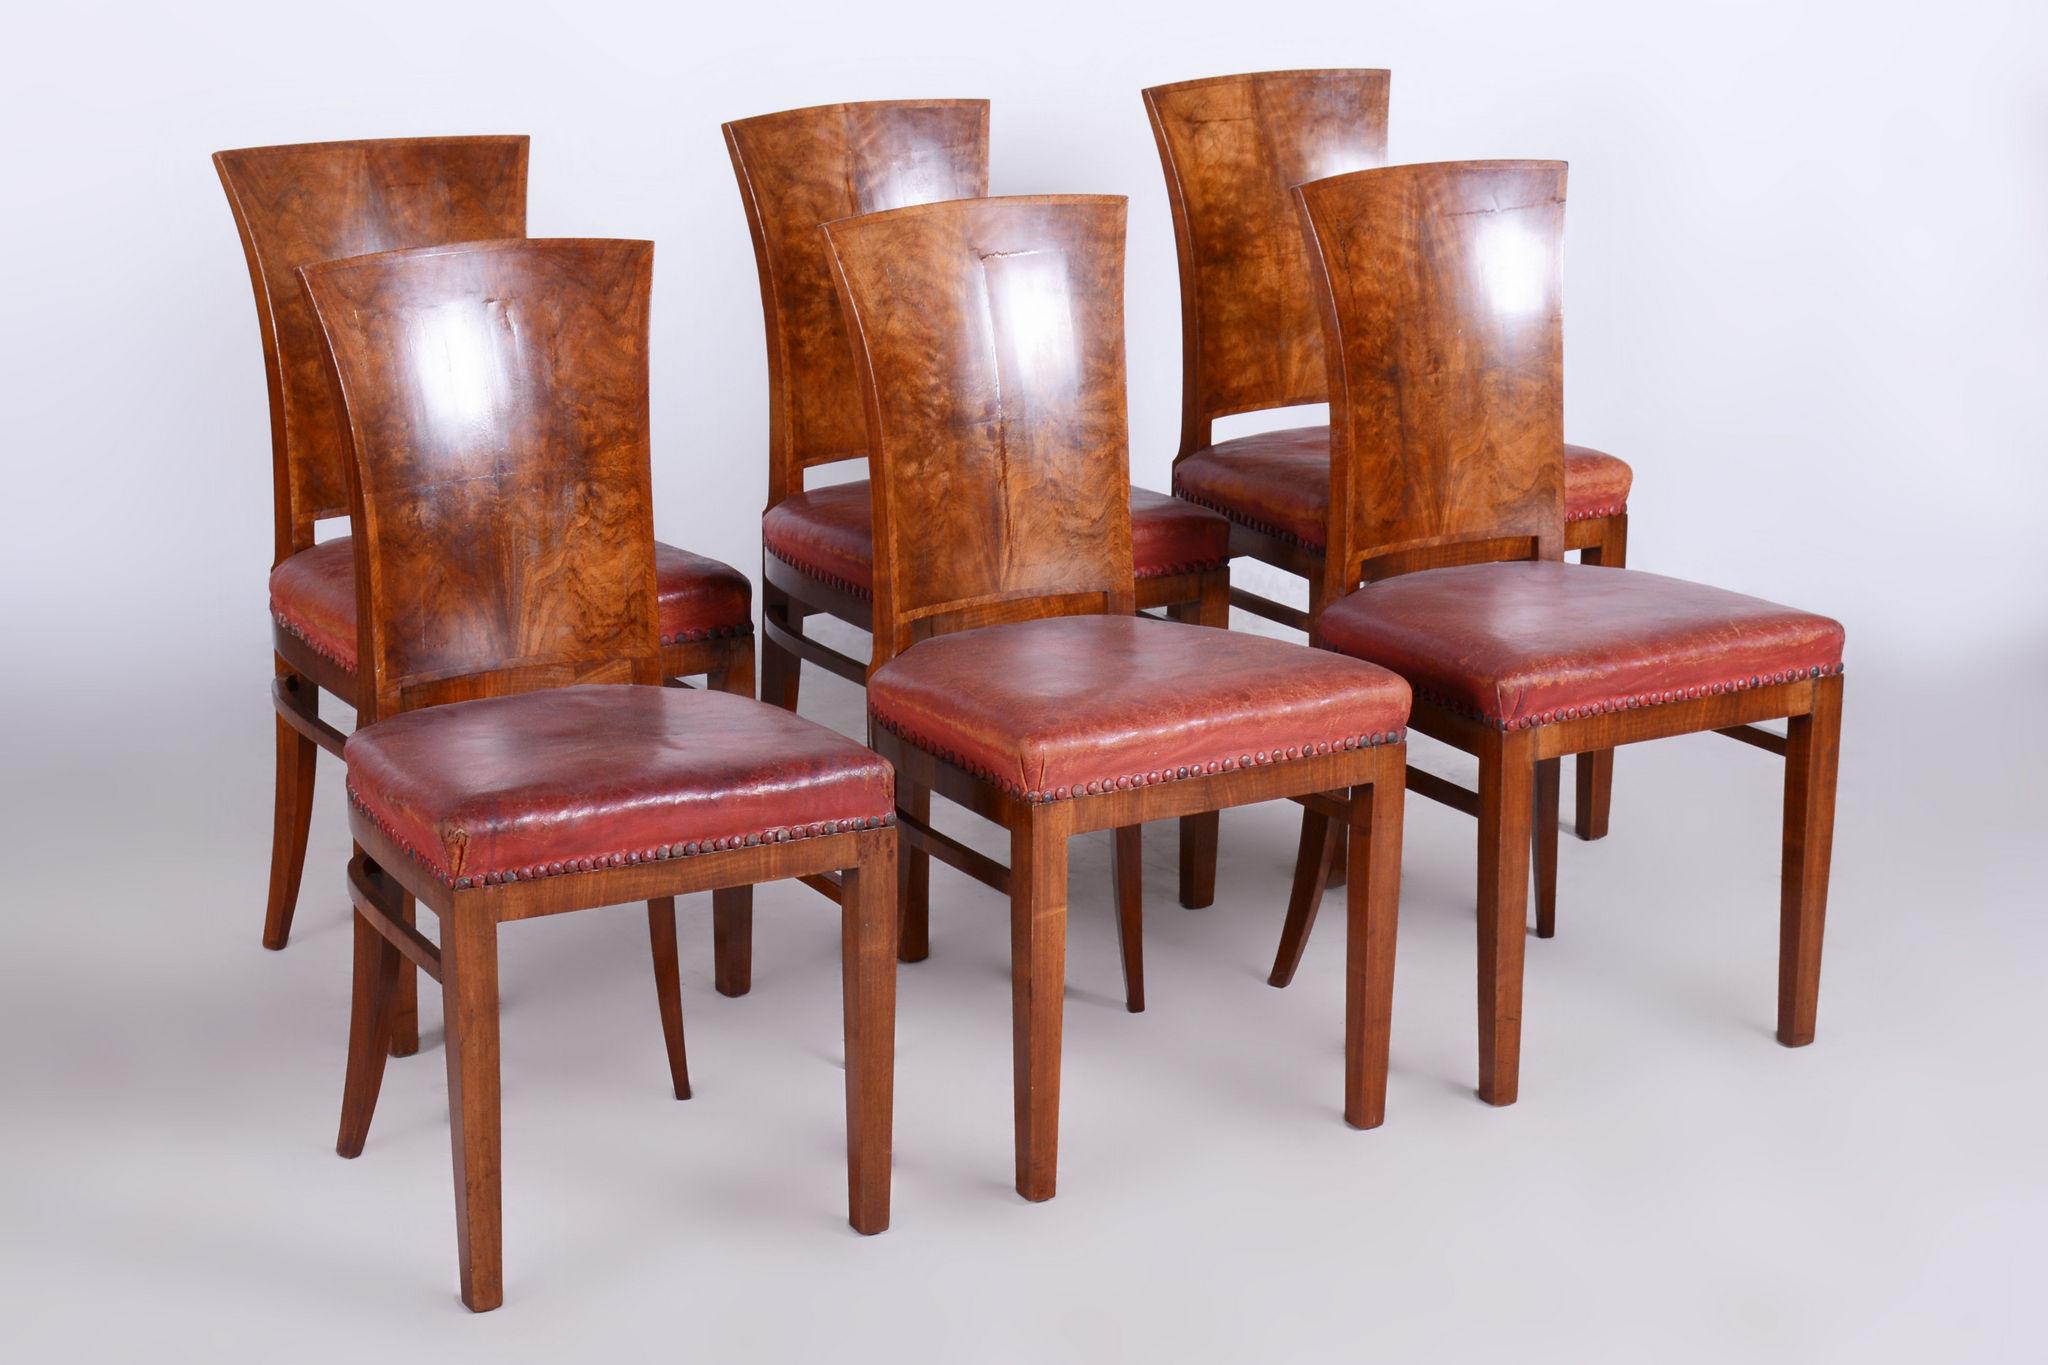 French Six Art Deco Chairs, Walnut, Restored, Original Upholstery, France, 1920s For Sale